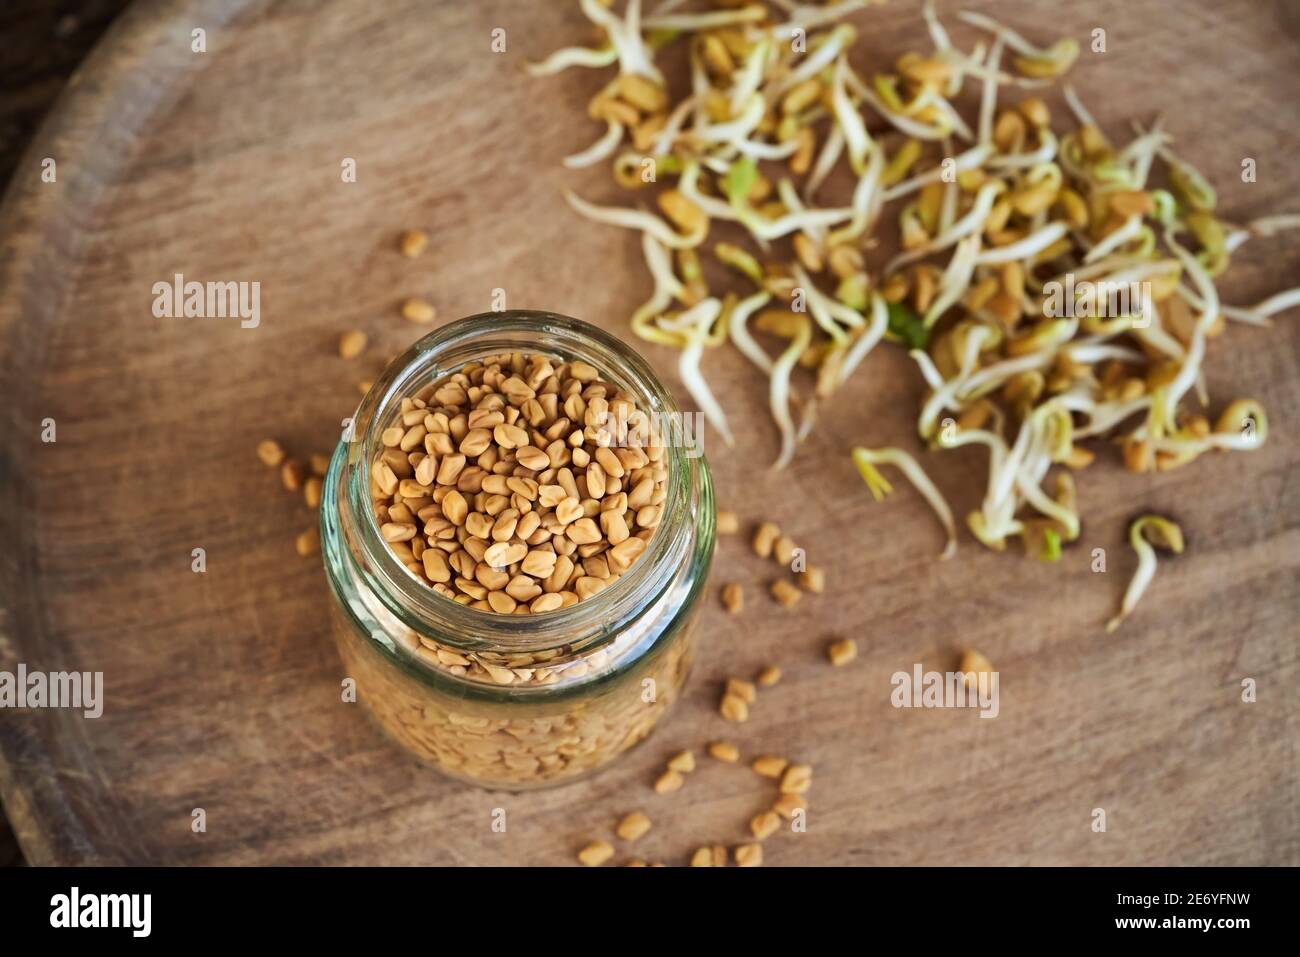 Dry fenugreek seeds in a glass, with fresh sprouts in the background Stock Photo